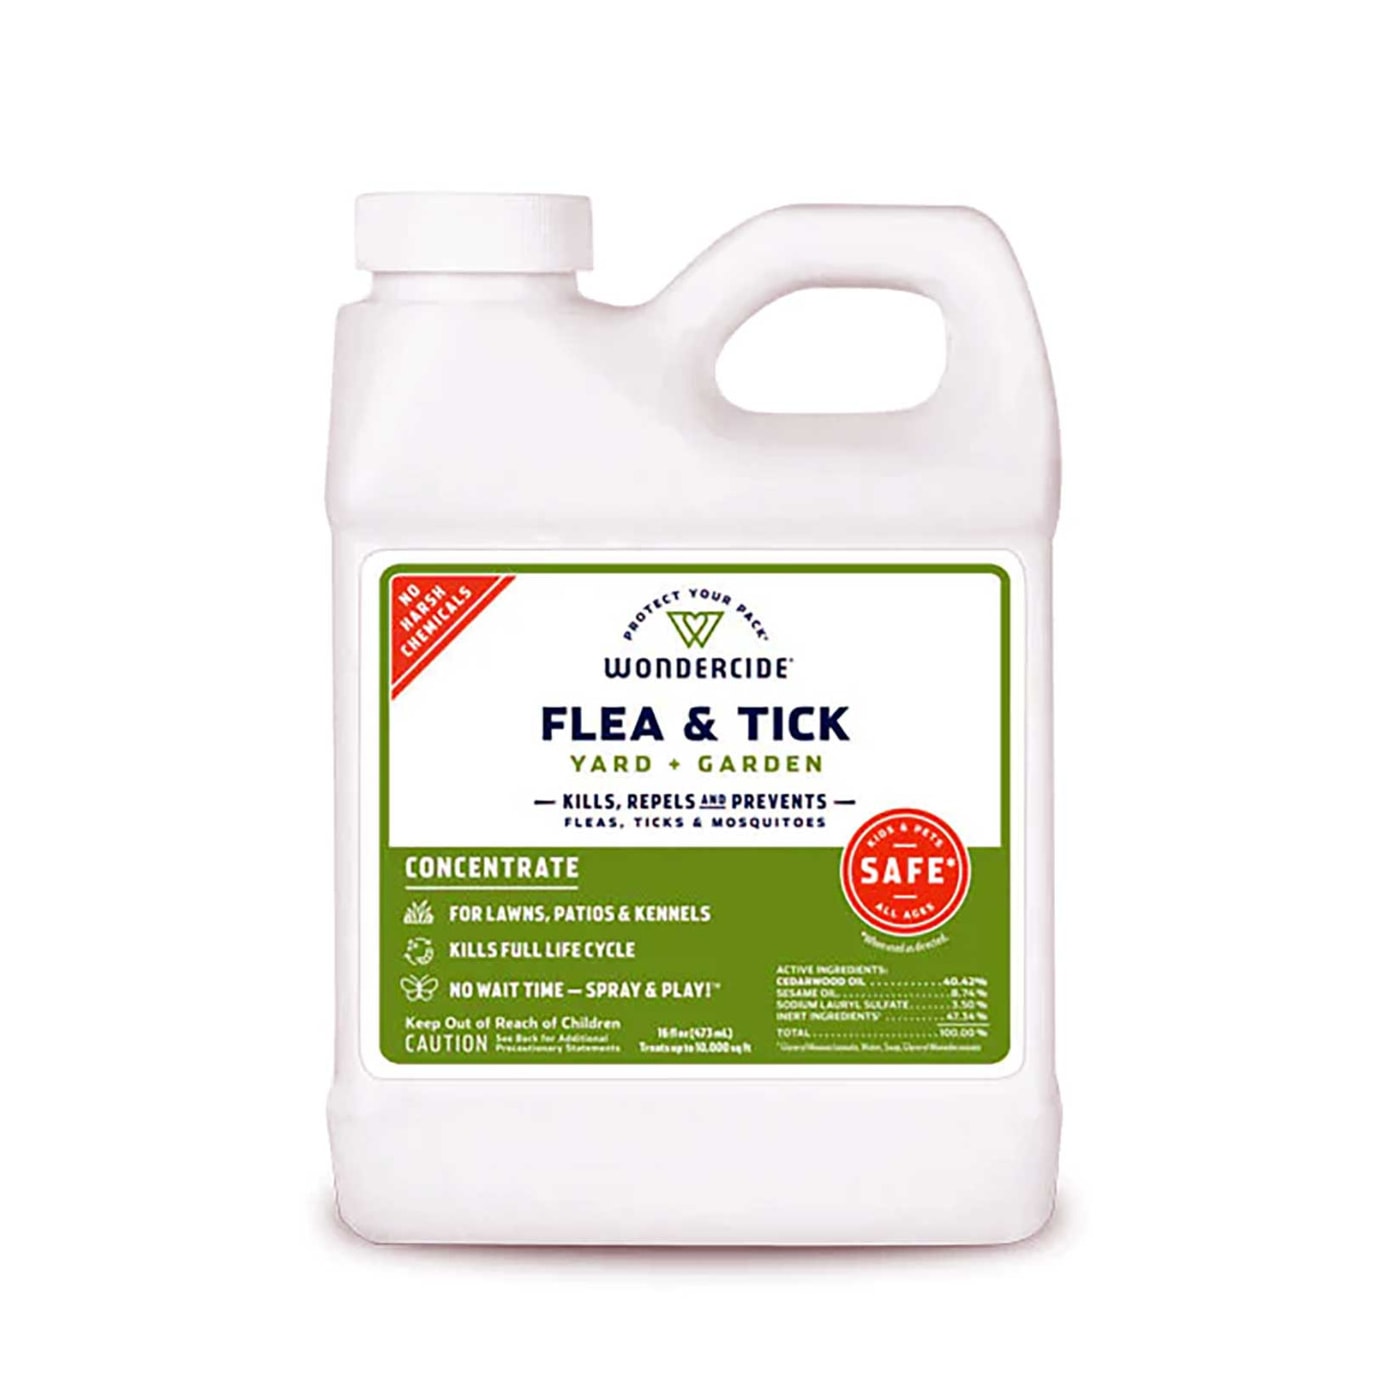 Wondercide Flea and Tick Yard and Garden Concentrate